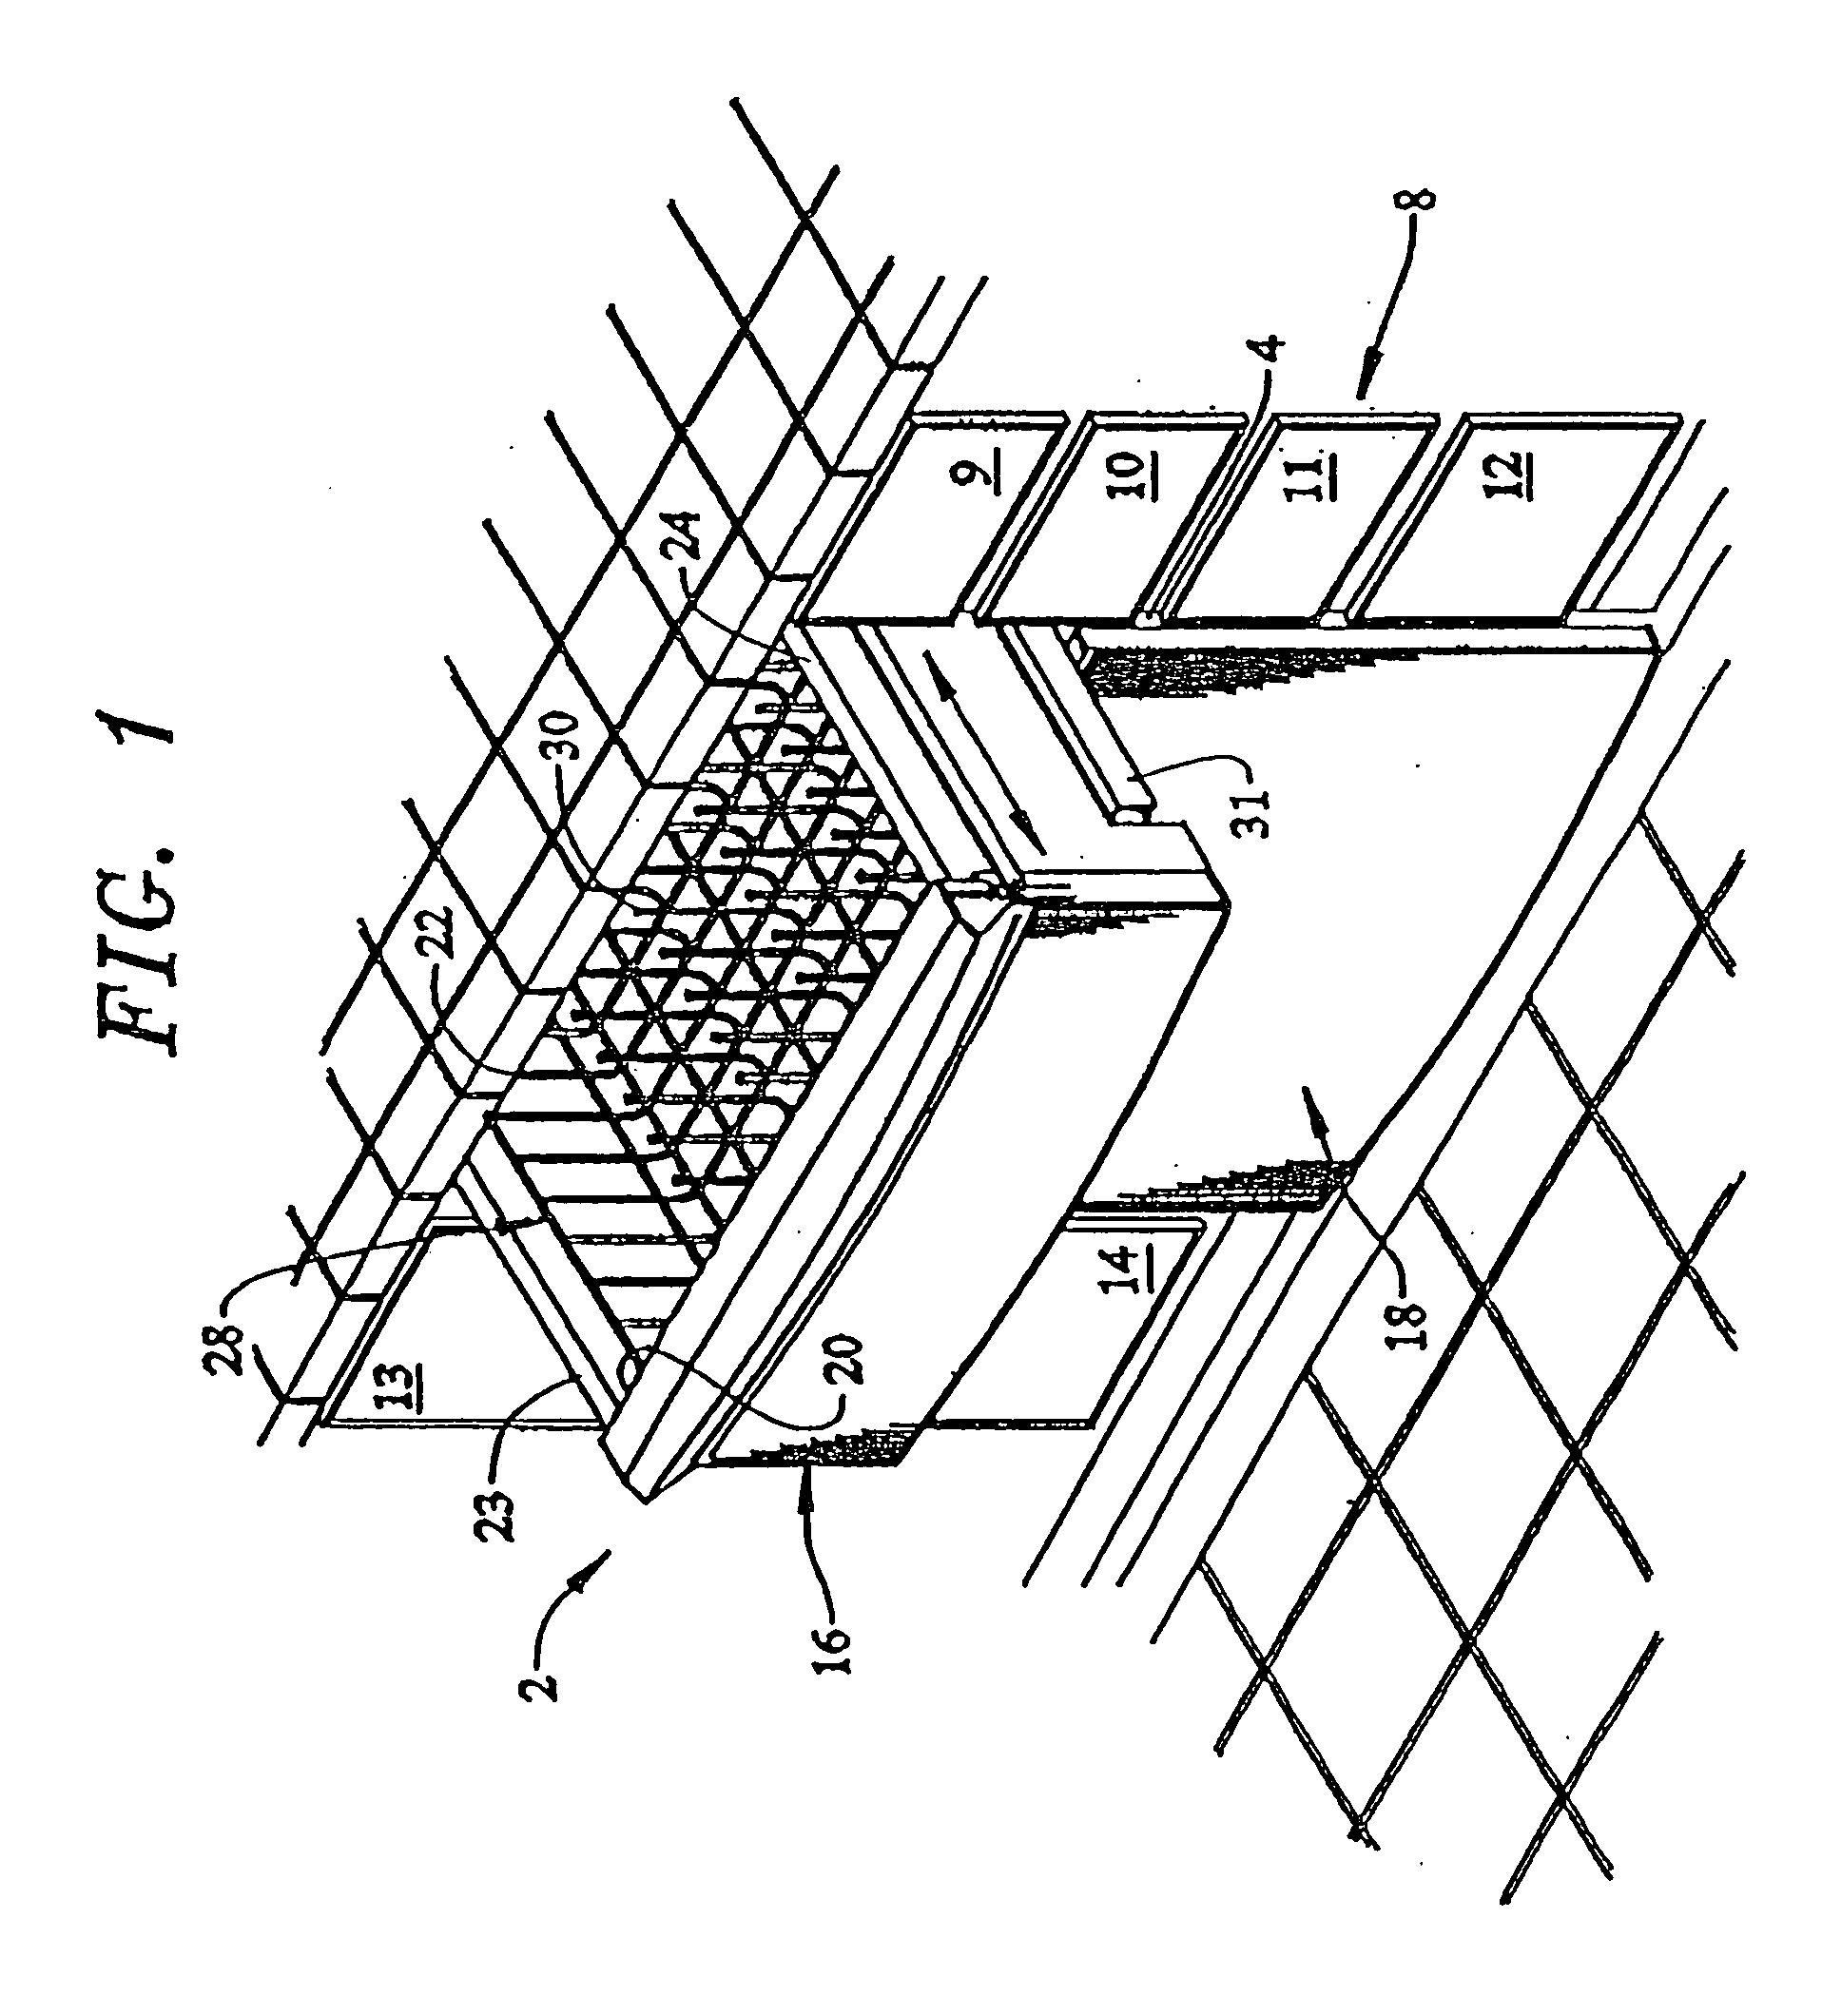 System for limiting pressure in a fine filter chamber for a dishwasher